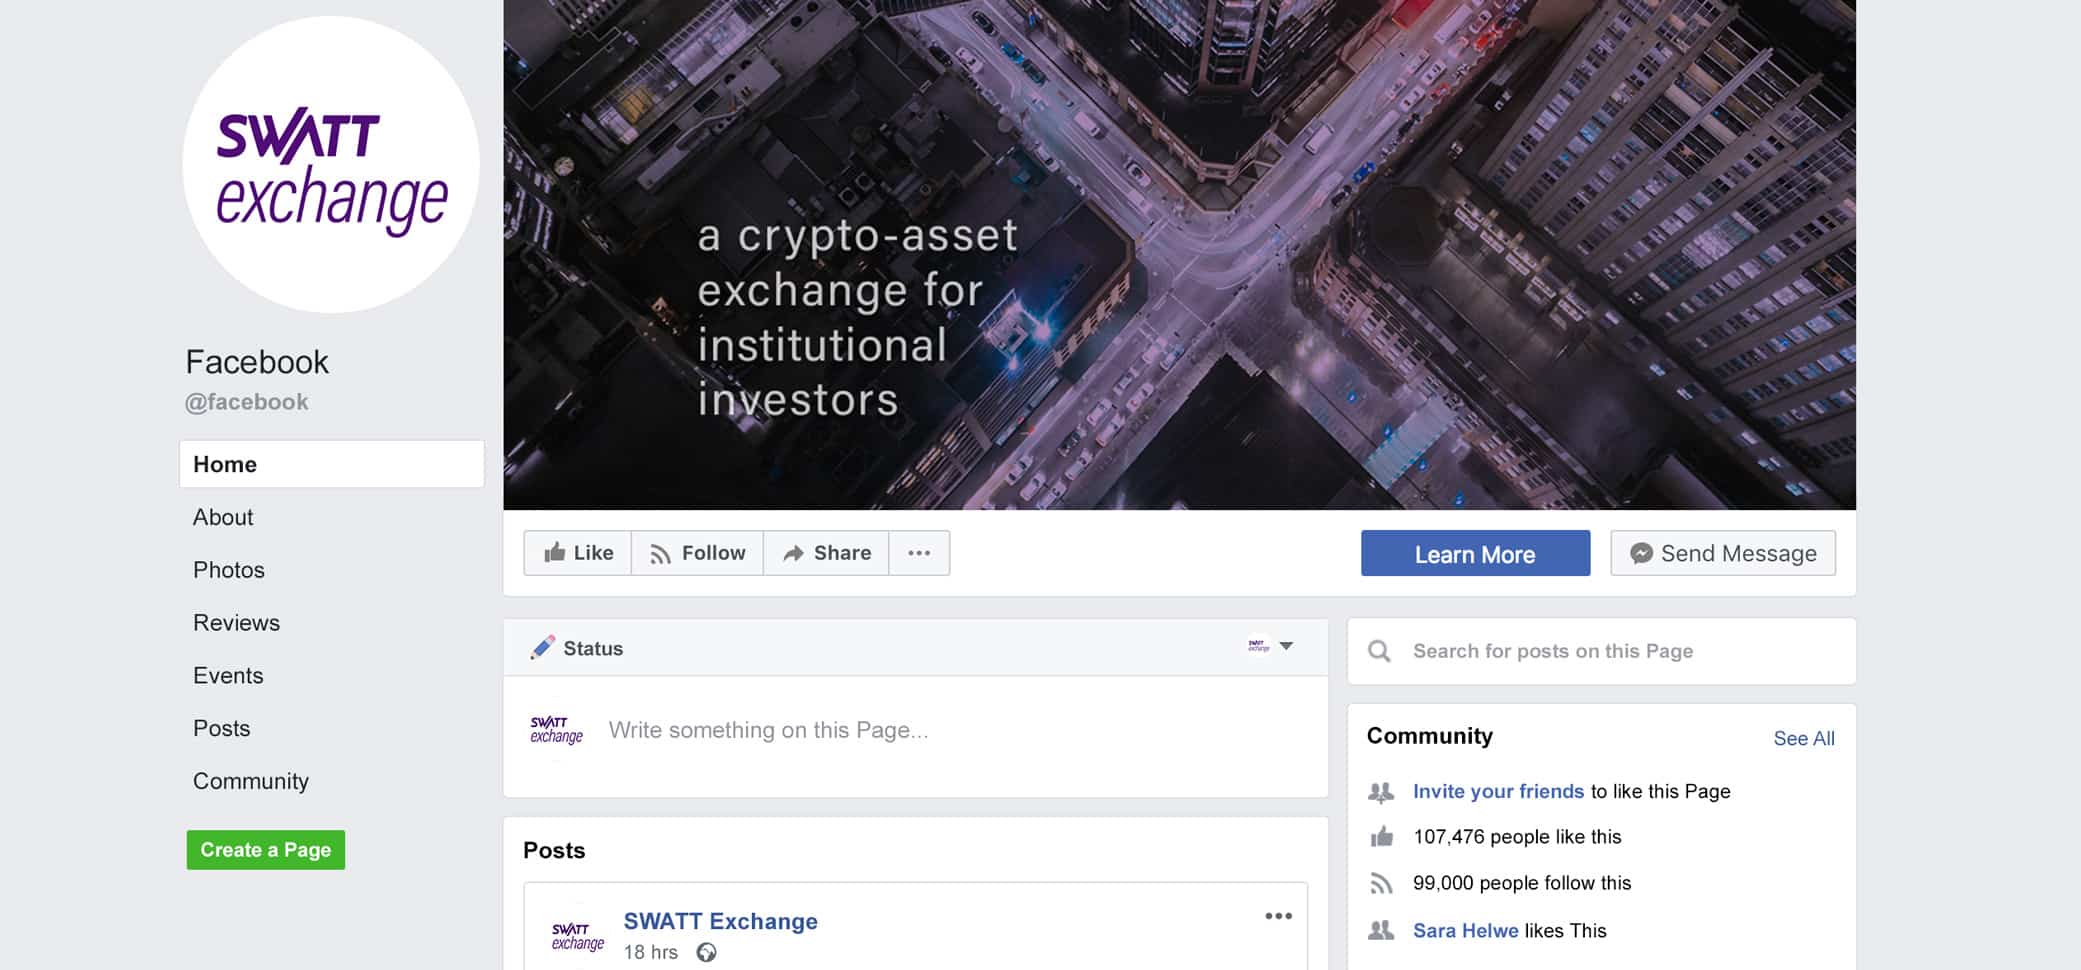 SWATT Exchange Facebook page with finance logo design and the brand's social media avatar and banner.